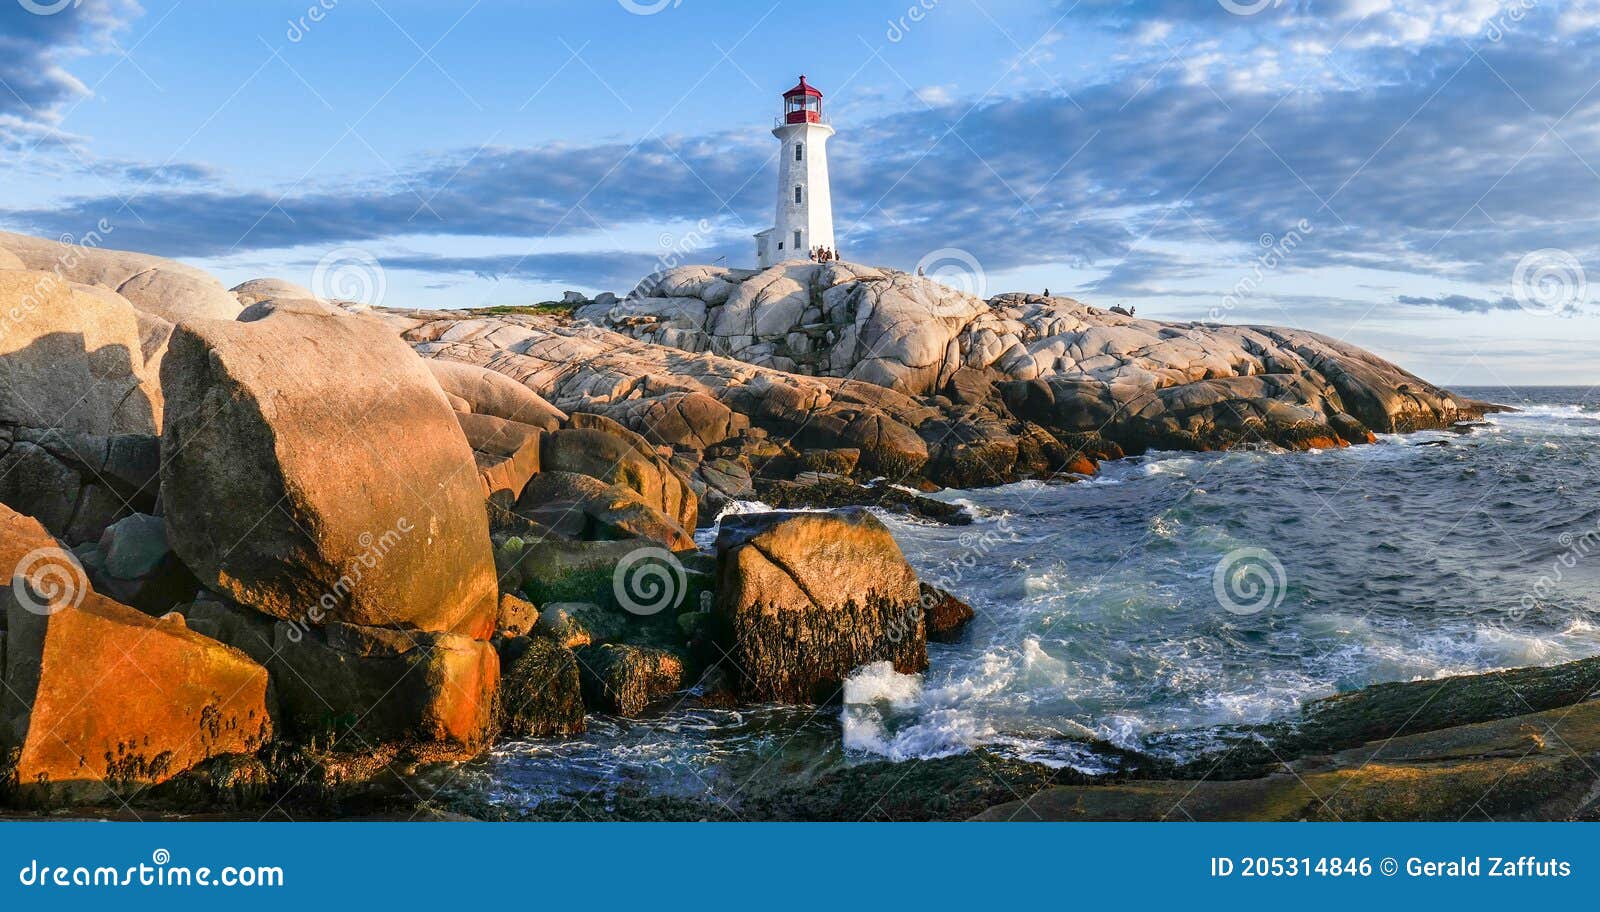 peggy`s cove lighthouse at sunset